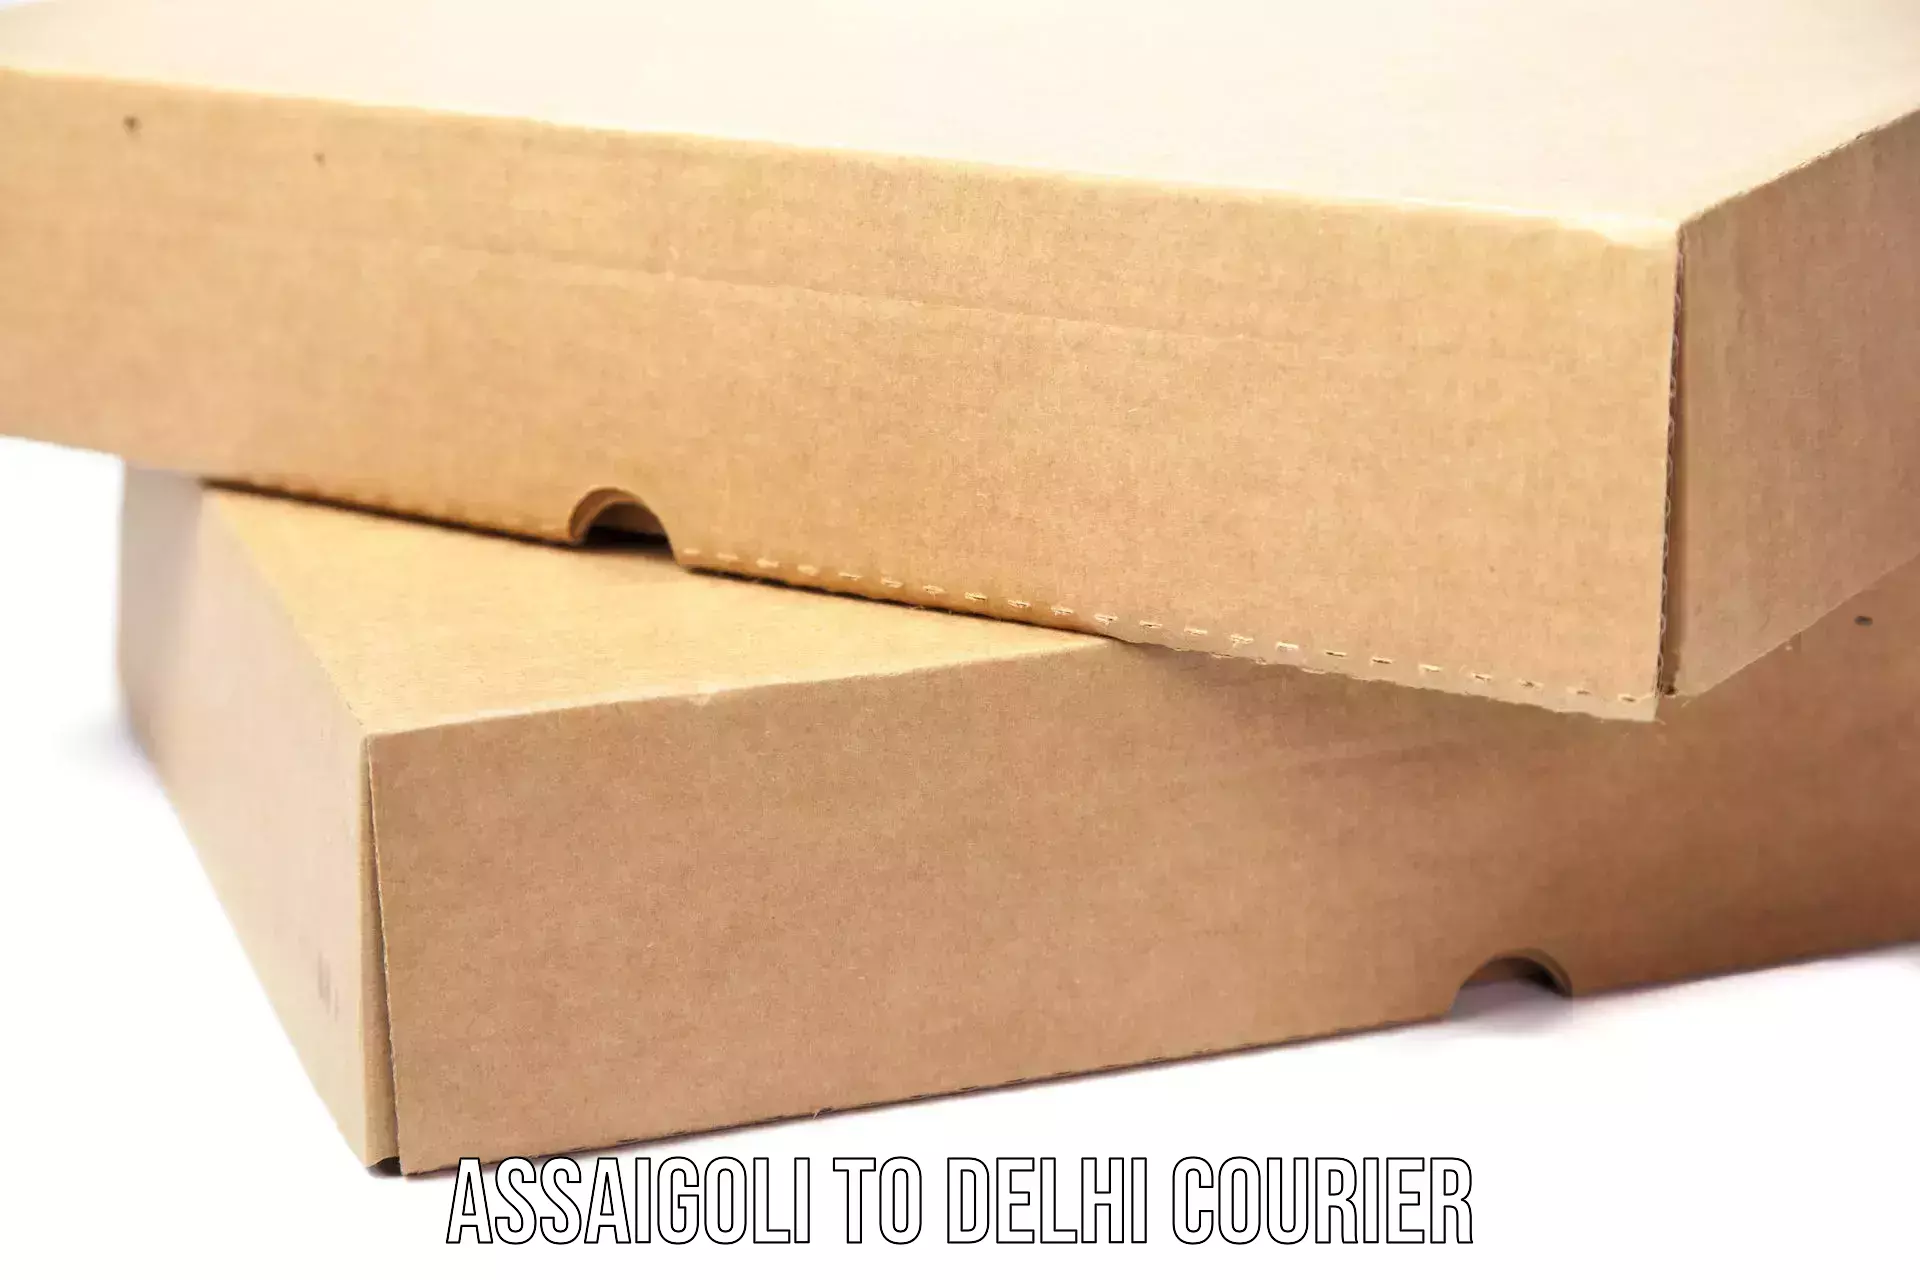 State-of-the-art courier technology Assaigoli to University of Delhi